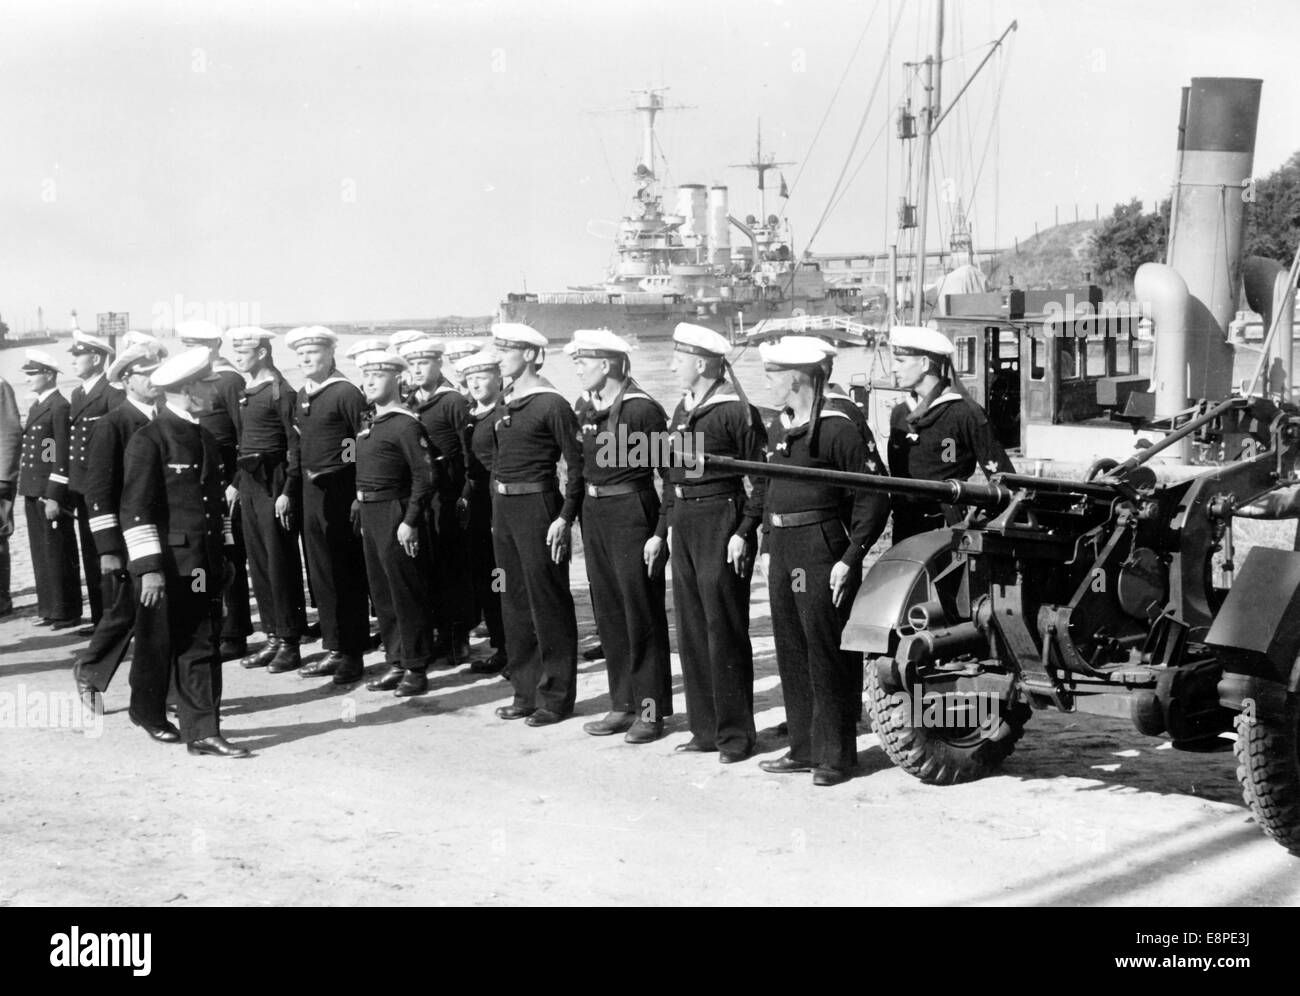 The Nazi propaganda picture shows German commander in chief of the German Navy, Fleet Admiral Erich Raeder inspecting the troops at the newly established 'Coastal Defense Danzig' in the Nazi controlled Free City of Danzig in August 1939. Fotoarchiv für Zeitgeschichtee - NO WIRE SERVICE Stock Photo